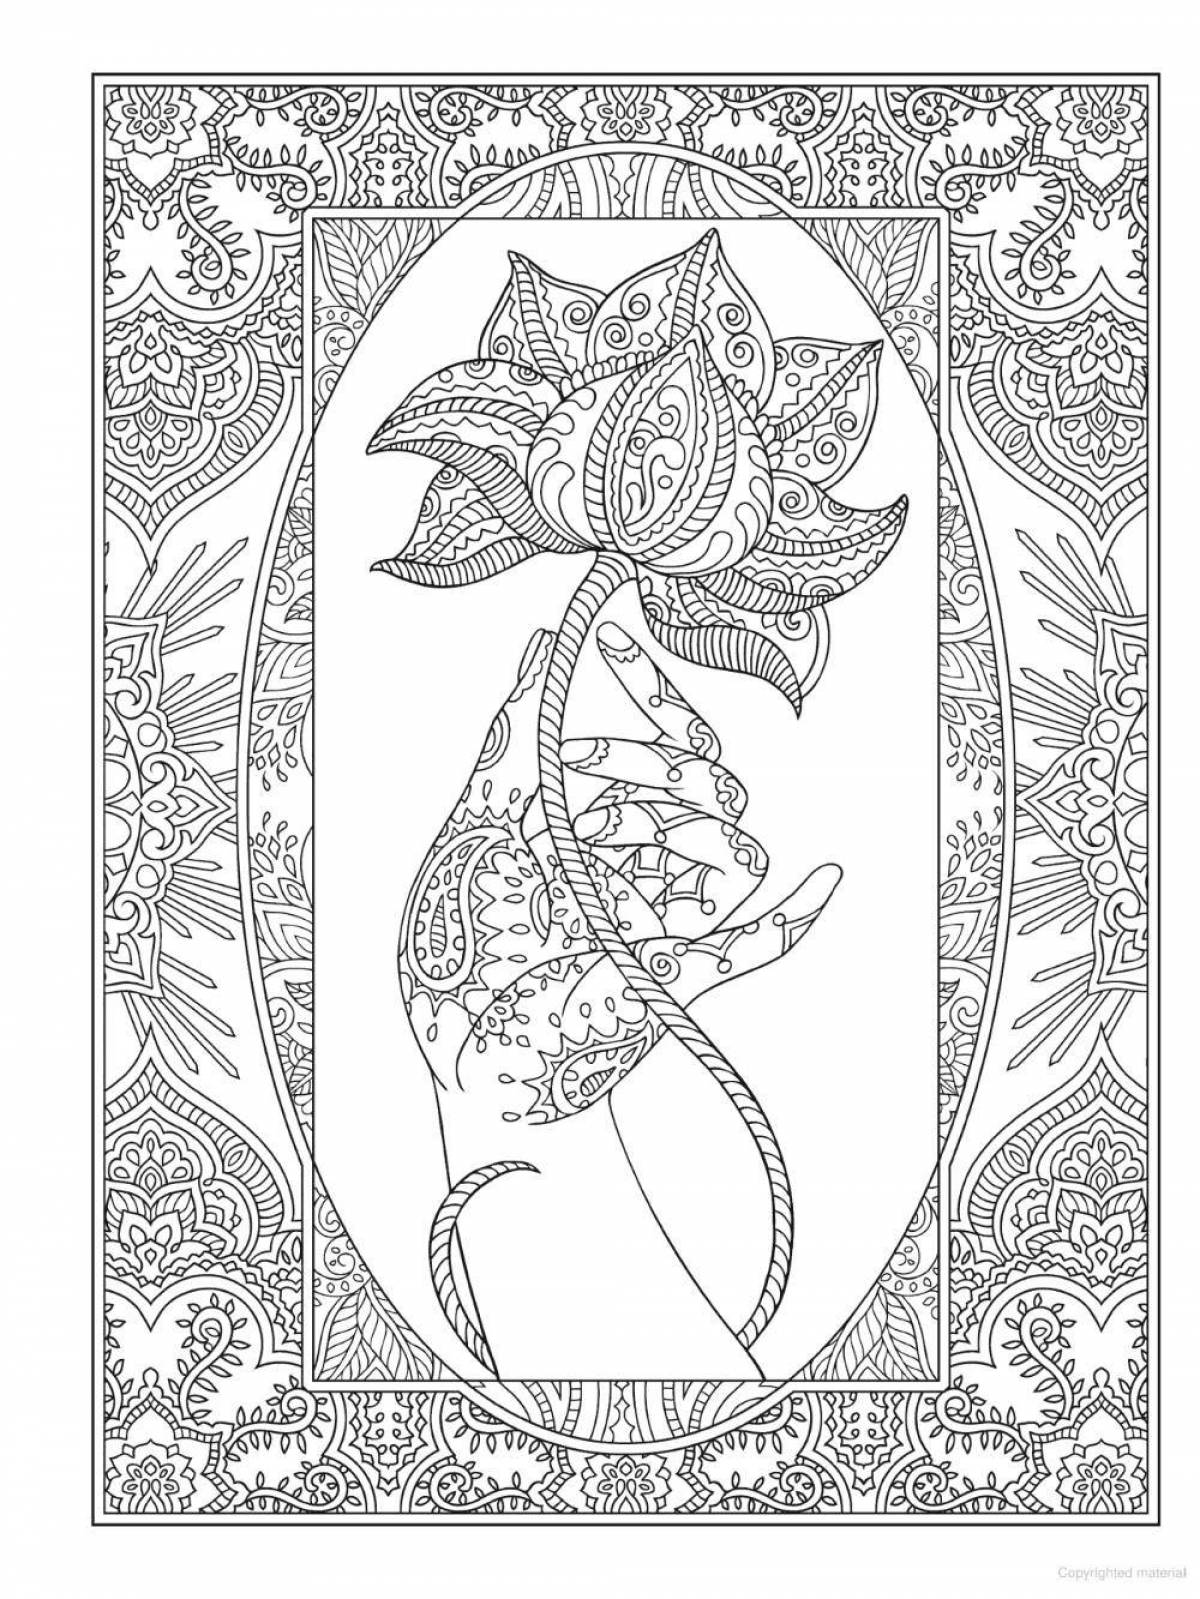 Meditative mystical coloring book for adults